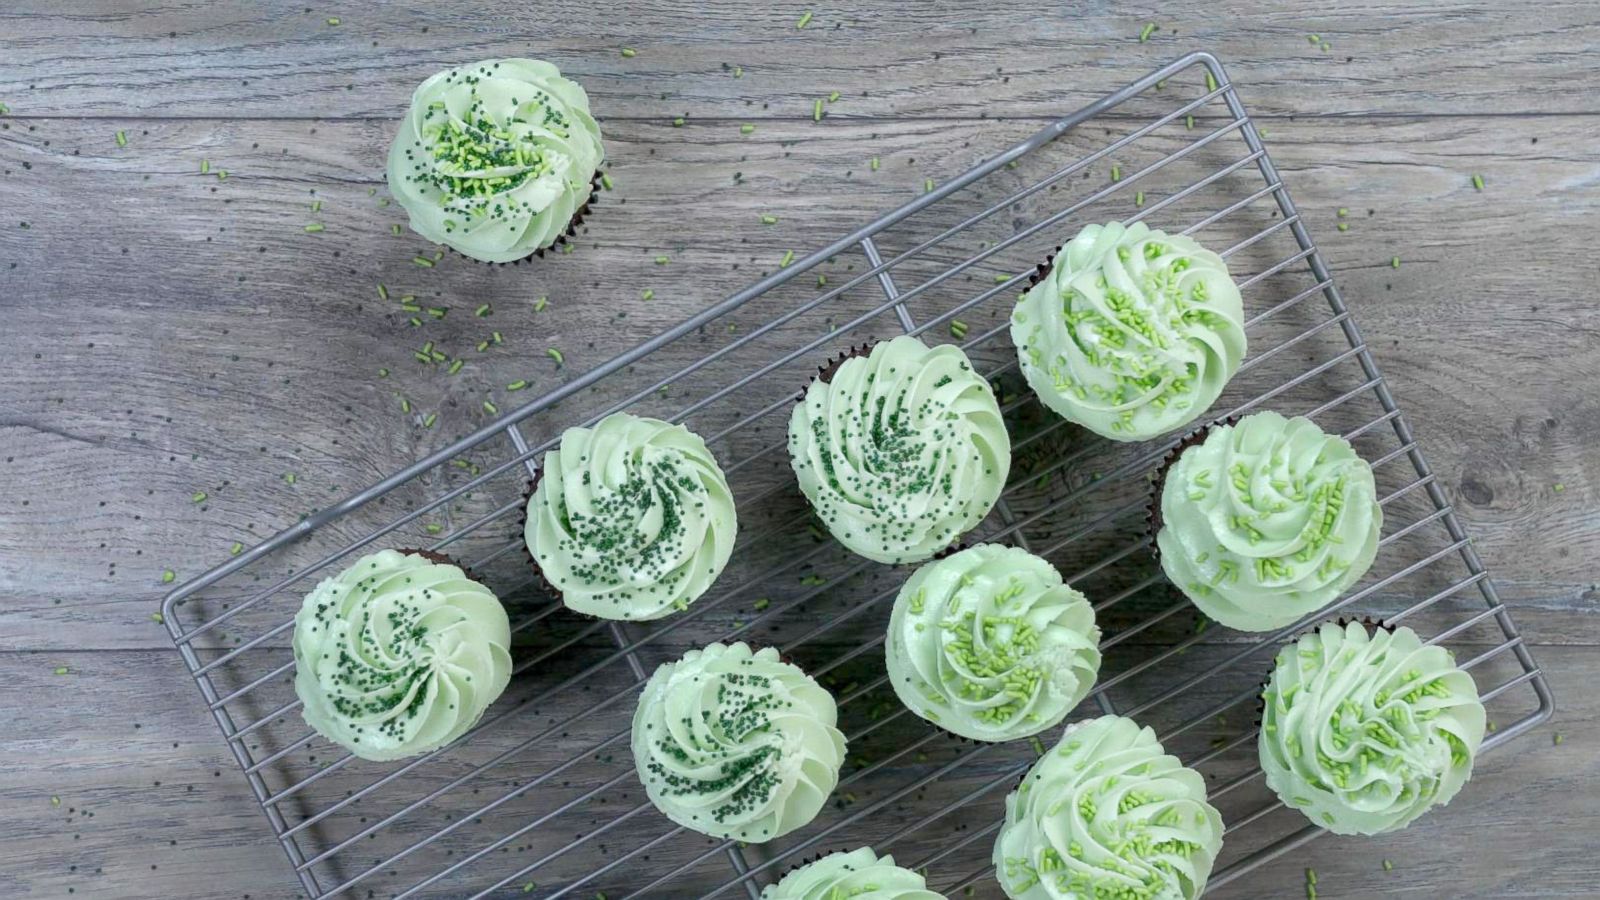 PHOTO: Try these festive green treats this St. Patrick’s Day.